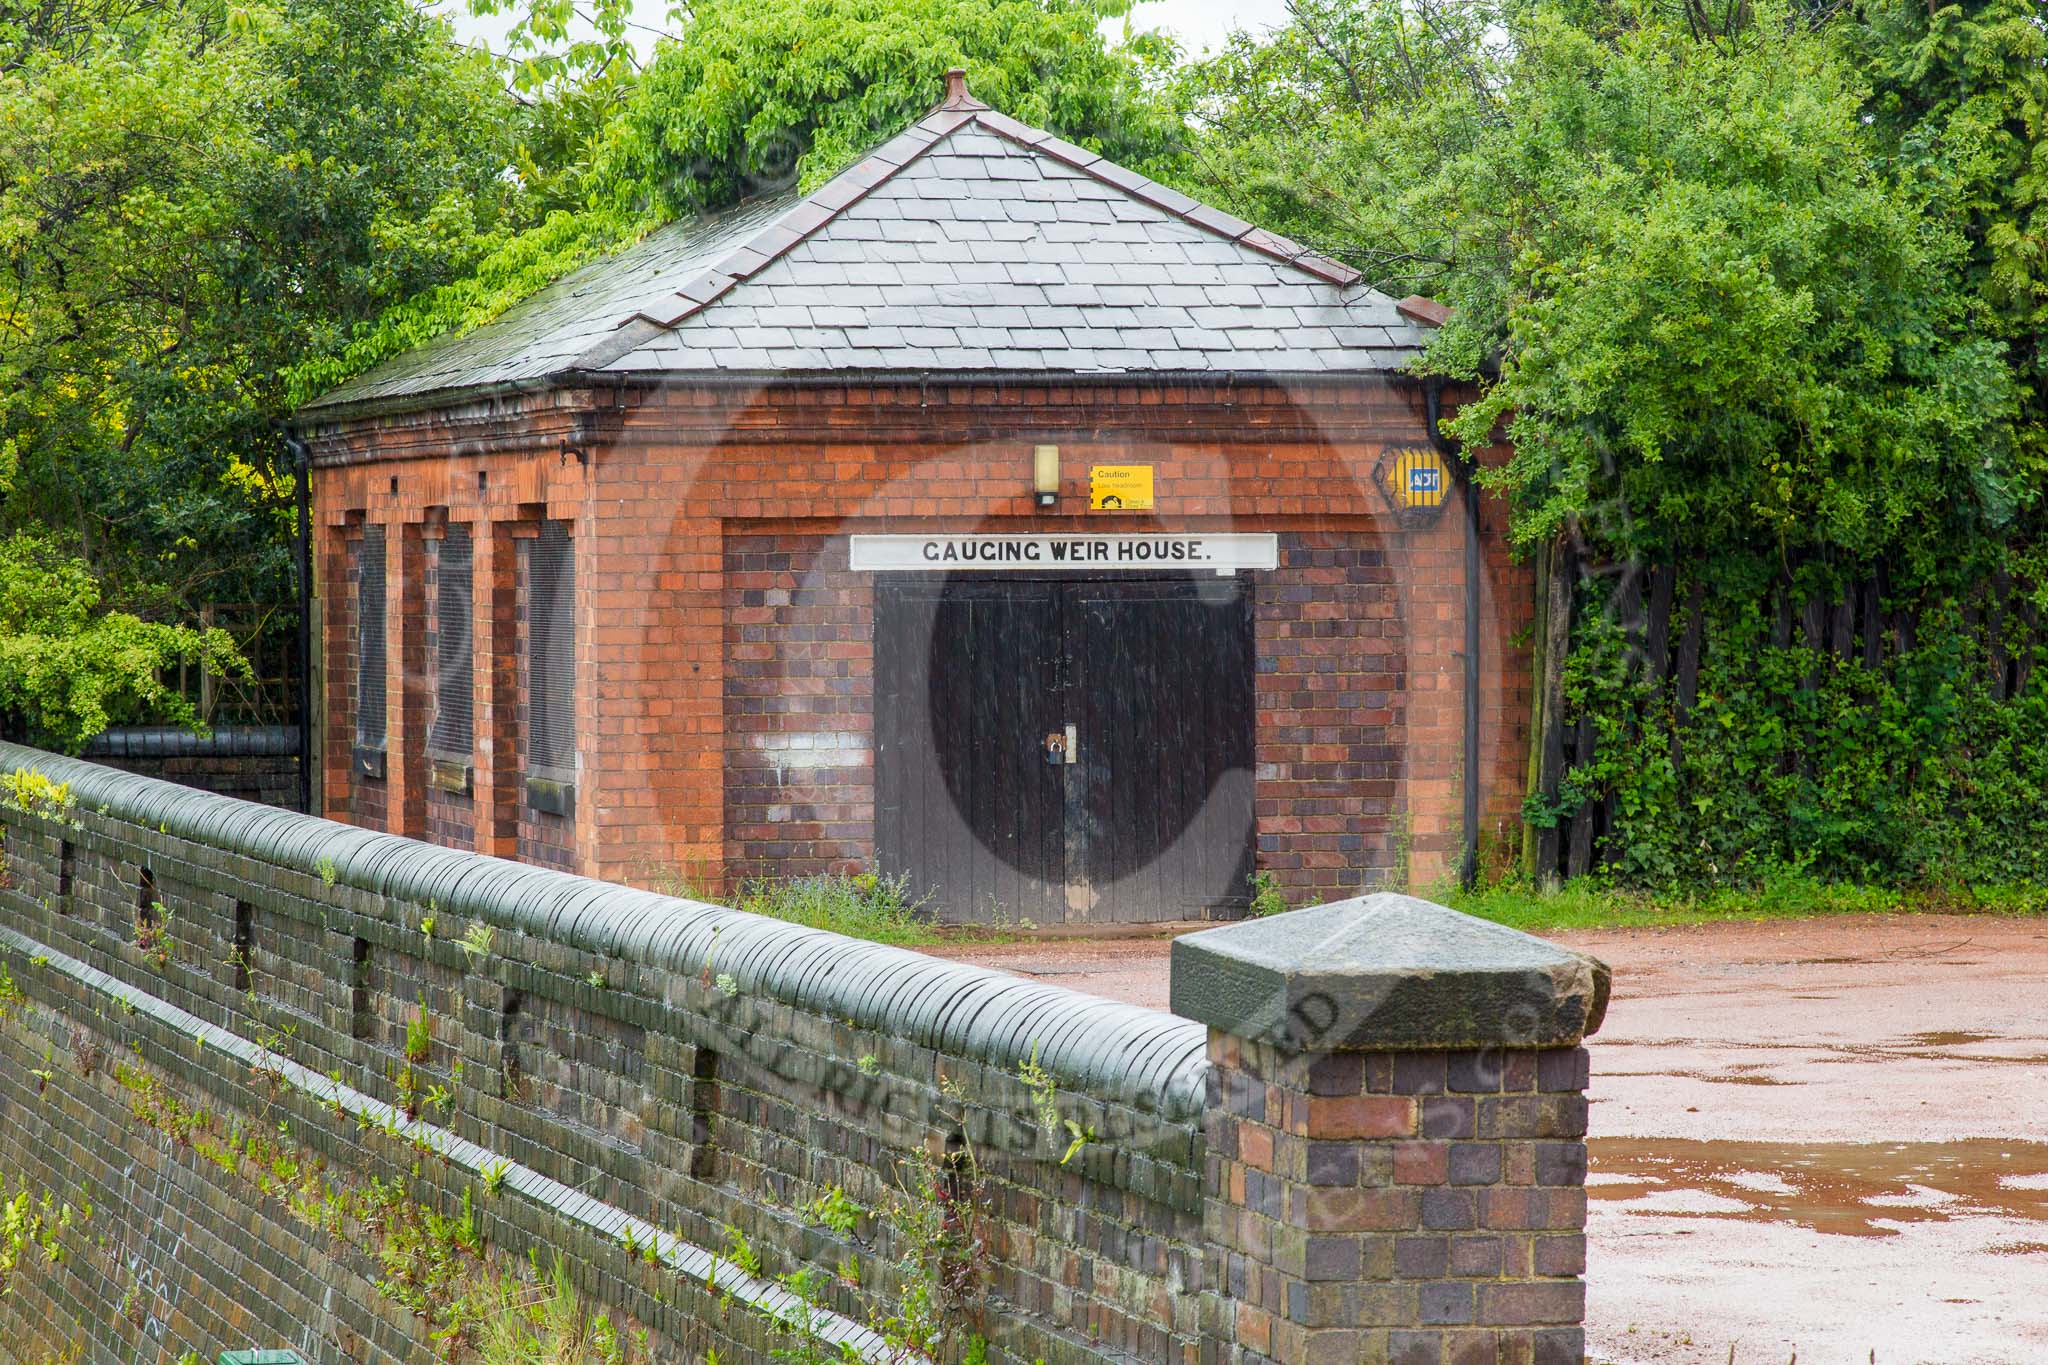 BCN Marathon Challenge 2014: Gauging Weir House at Perry Bar Top Lock on the Tame Valley Canal.
Birmingham Canal Navigation,


United Kingdom,
on 24 May 2014 at 14:17, image #124